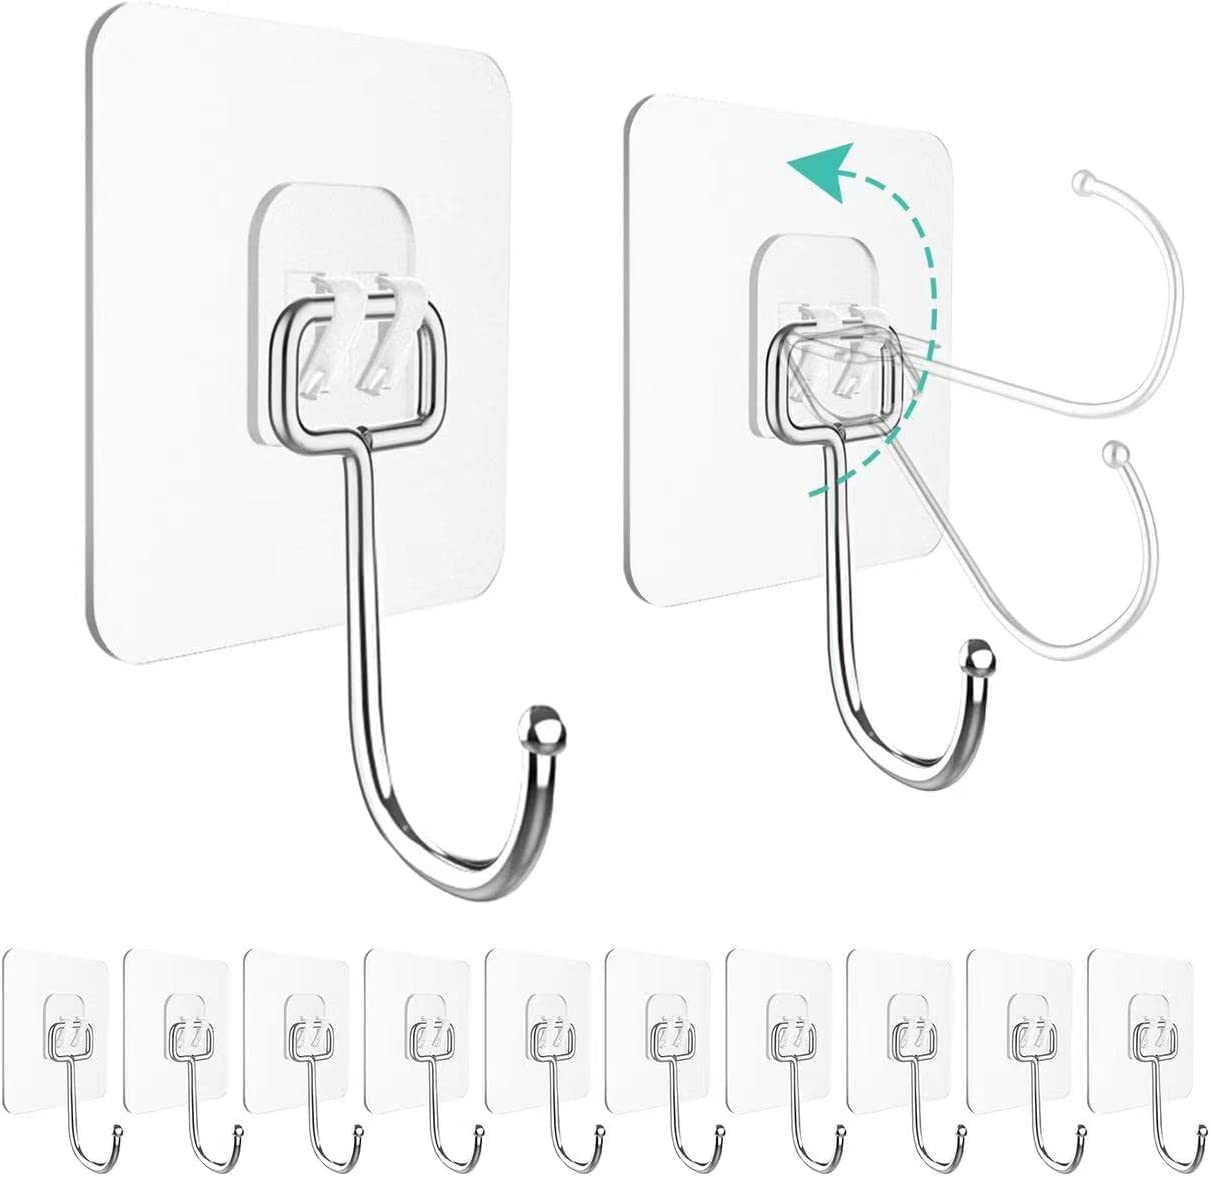 Heavy-Duty Self-Adhesive Wall Hooks - Effortlessly Organize Your Space (5 numbers)